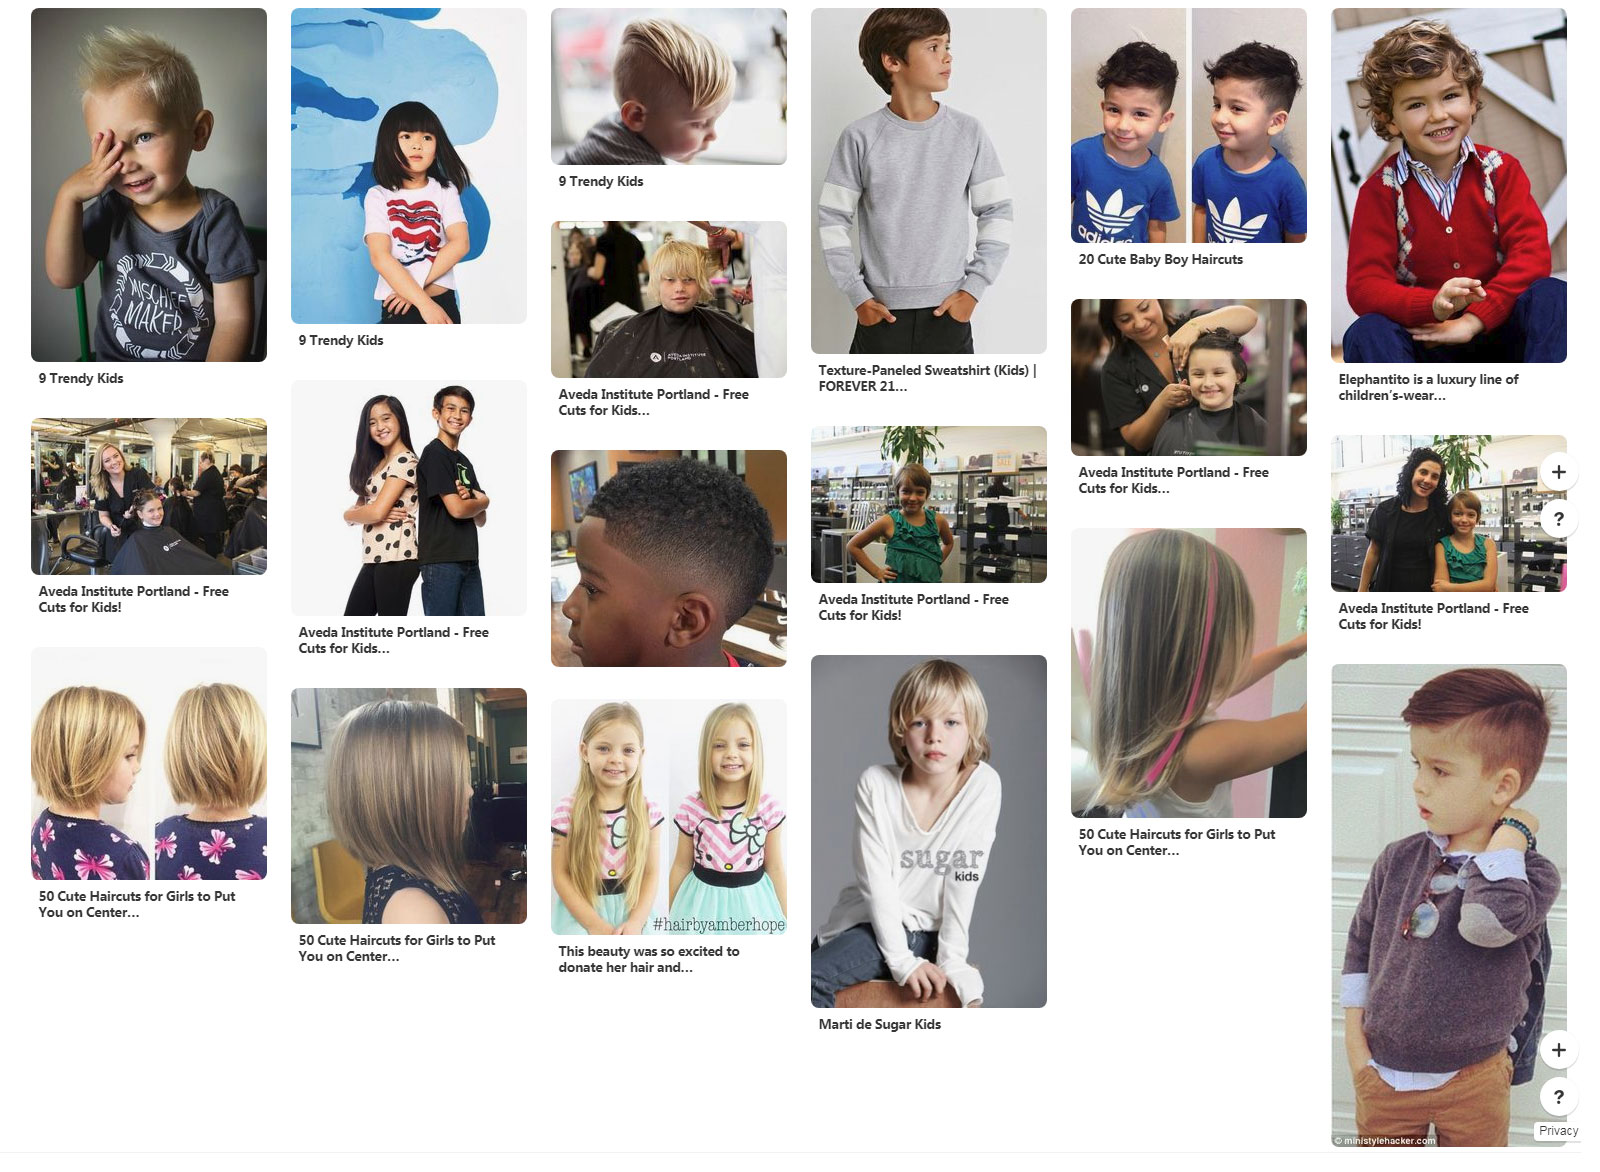 Back To School Free Cuts For Kids 2019 Aveda Institute